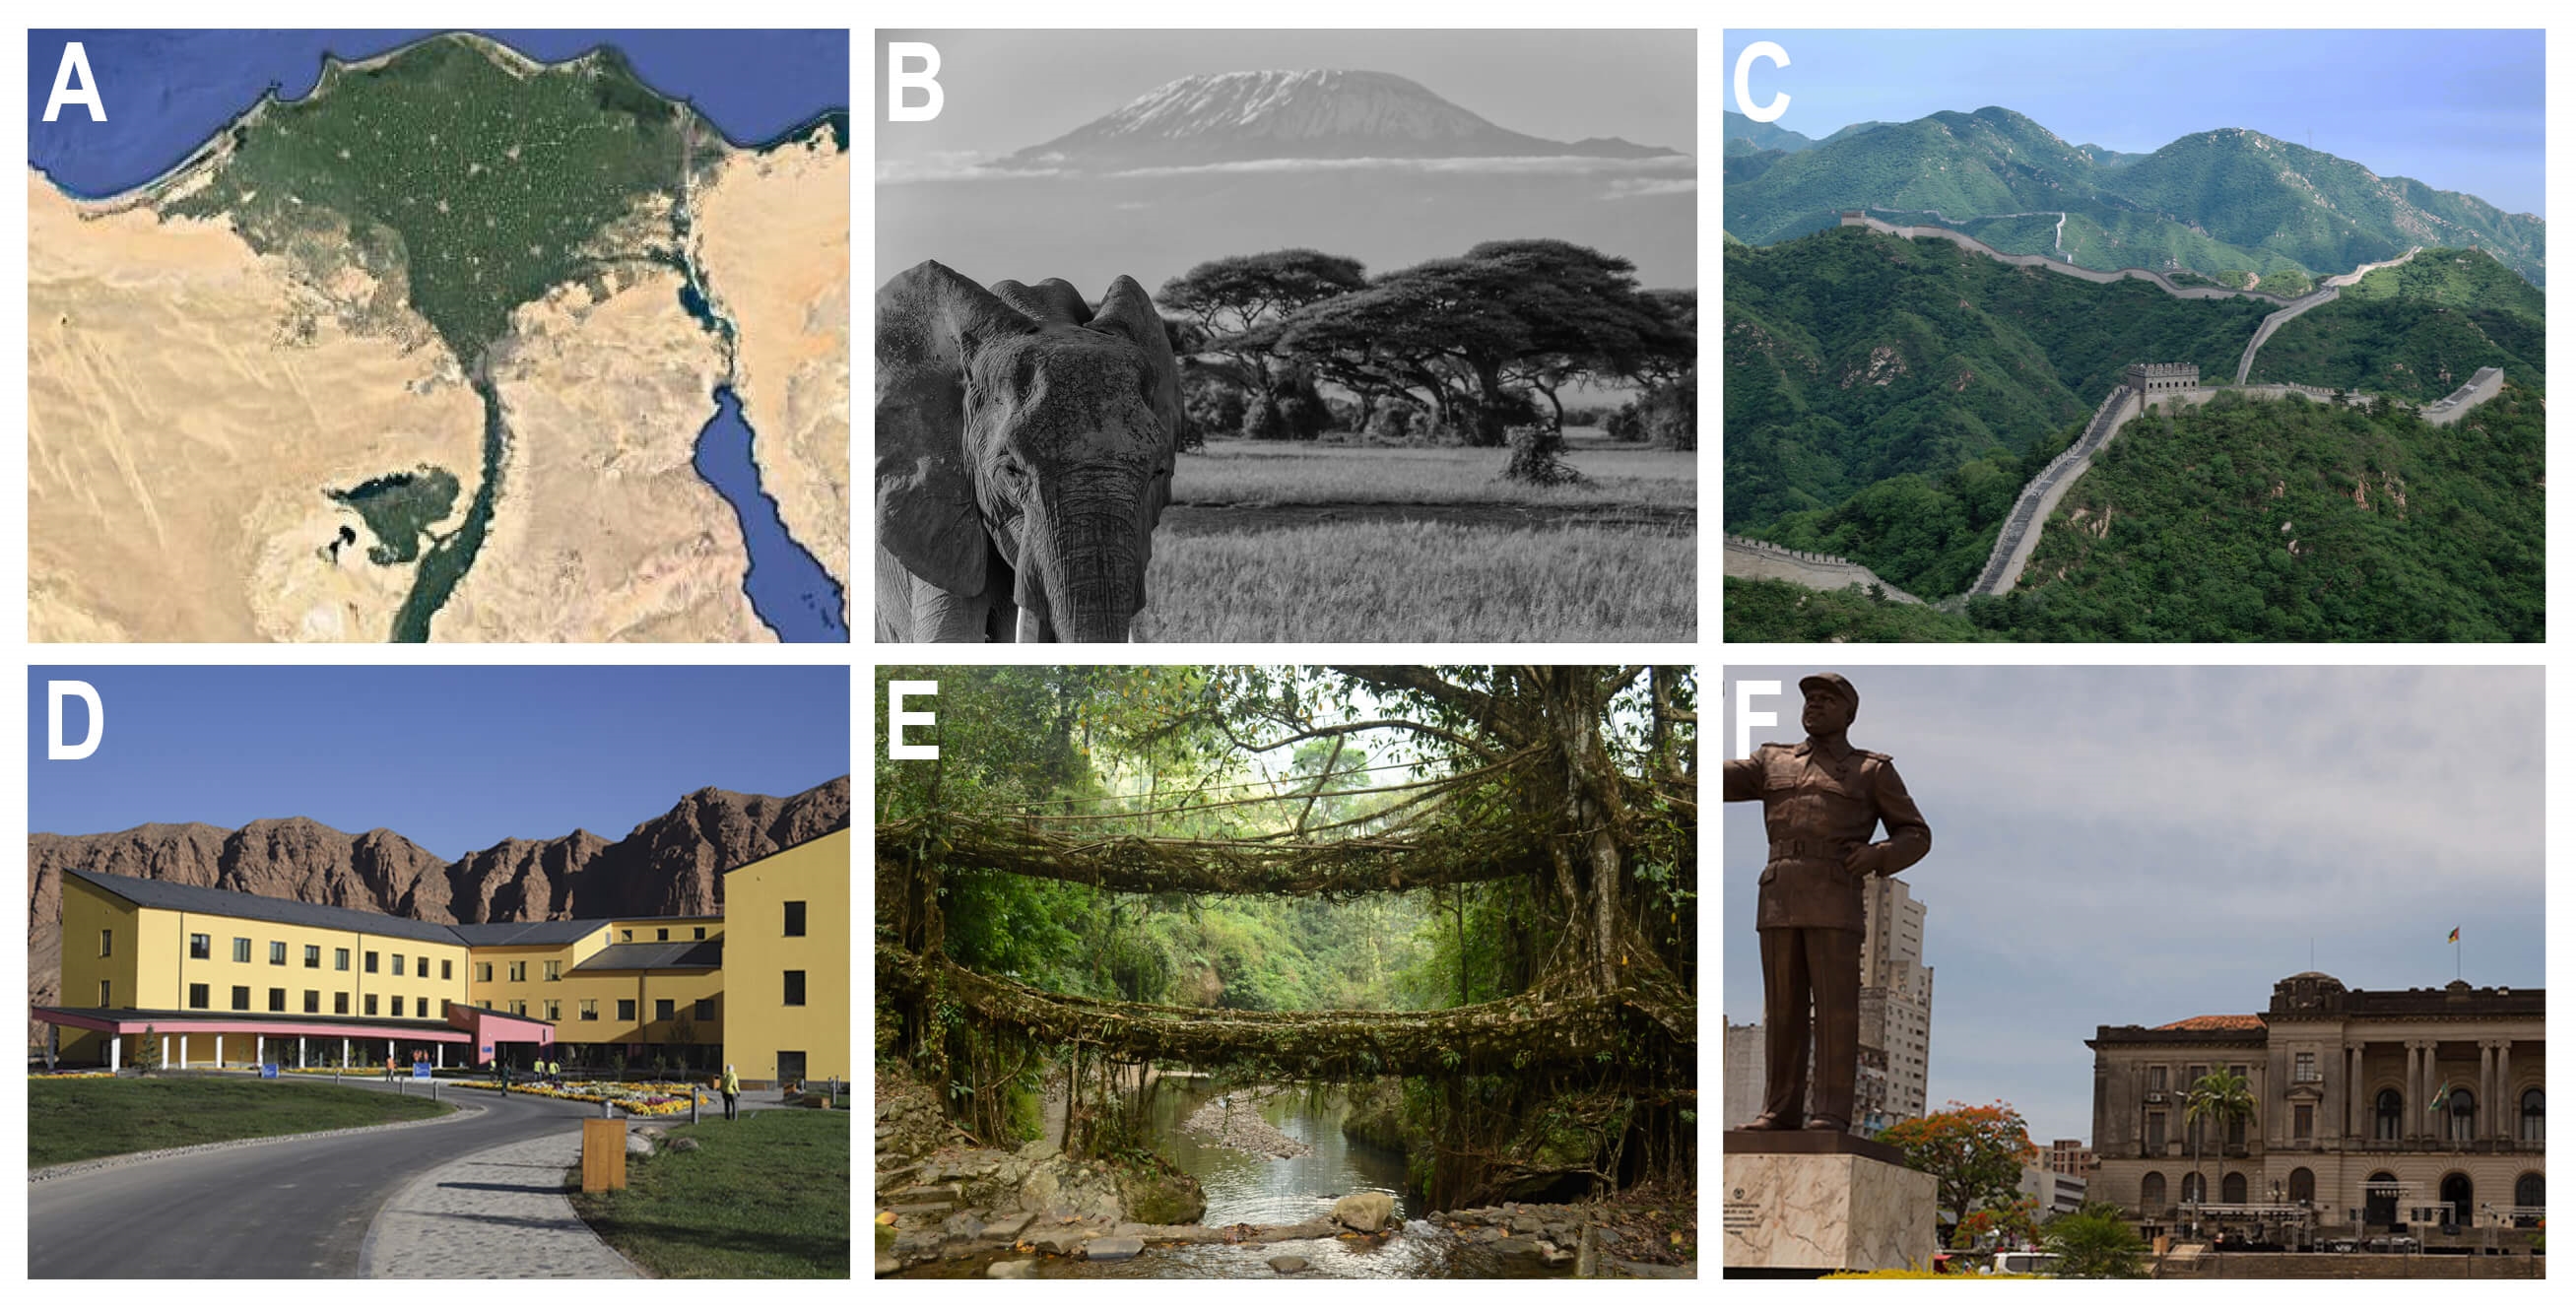 This images contains six images - each depicts a country where Seneca has participated in a project